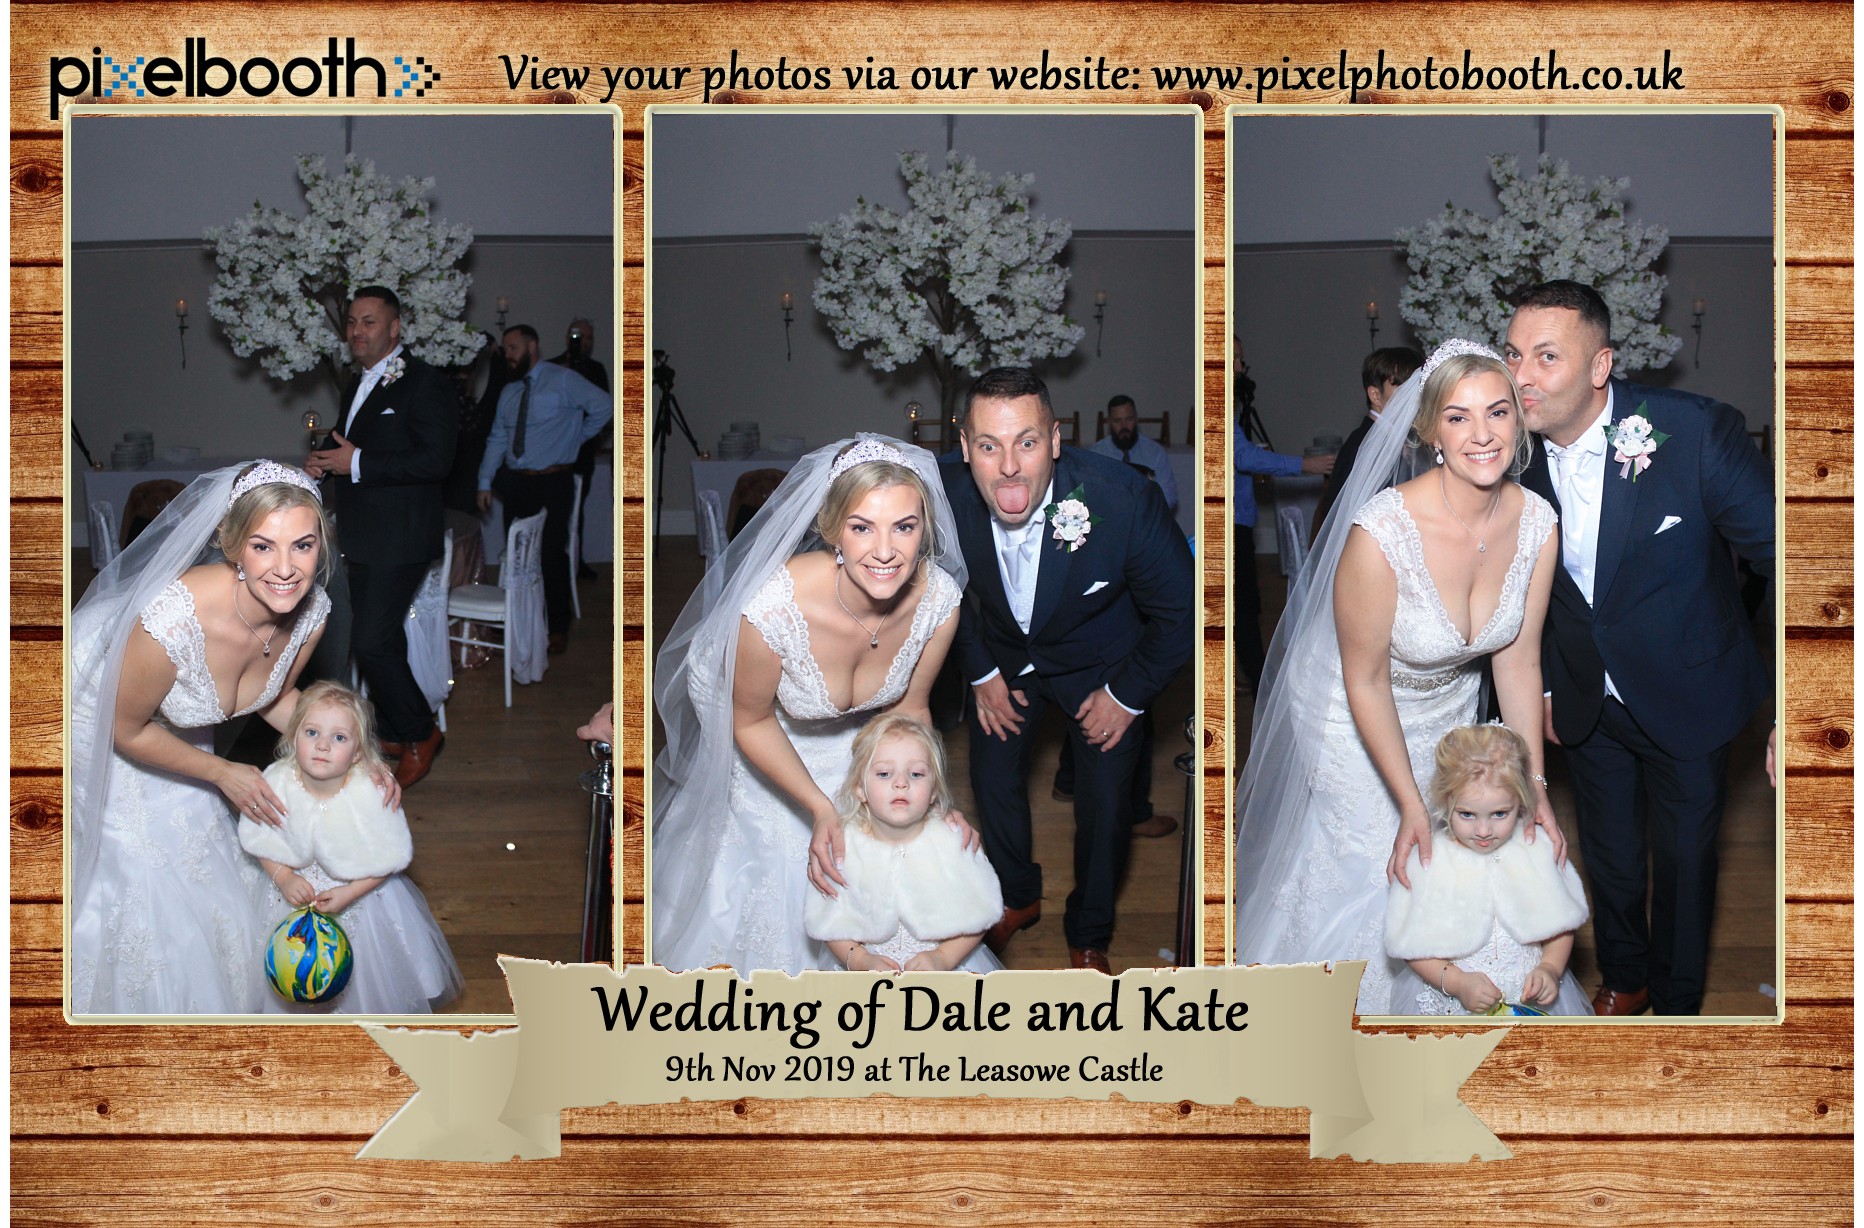 9th Nov 2019: Dale and Kate's Wedding at Leasowe Castle